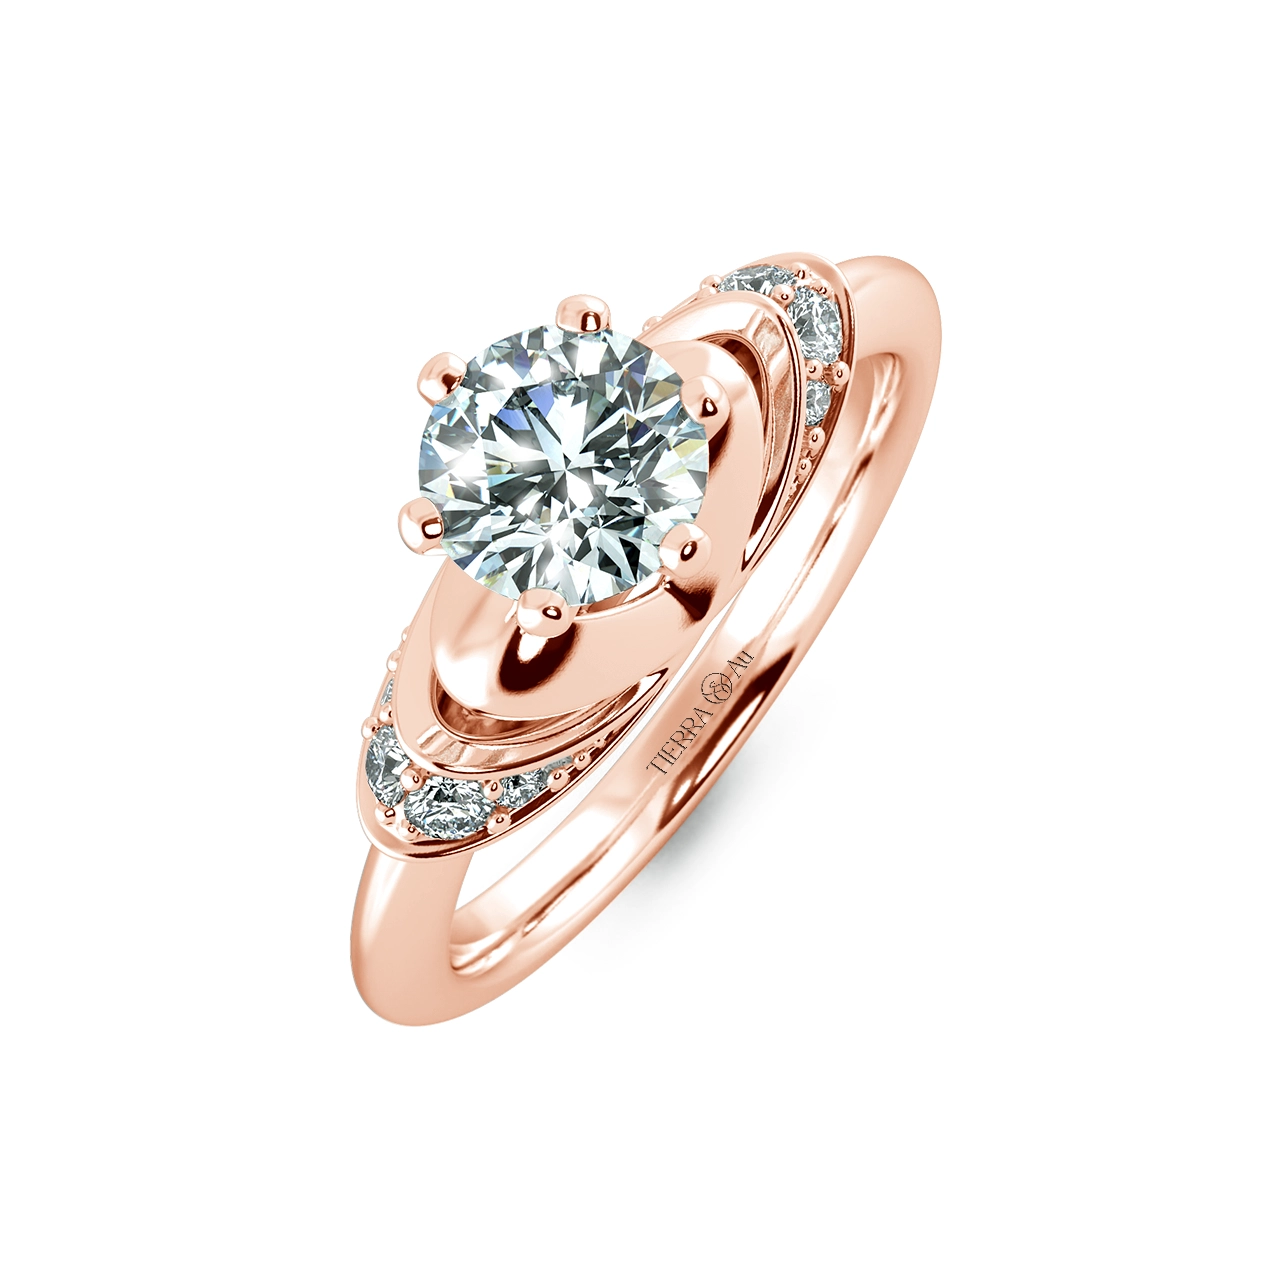 Solitaire Engagement Ring with Stylized Neck NCH1306 3